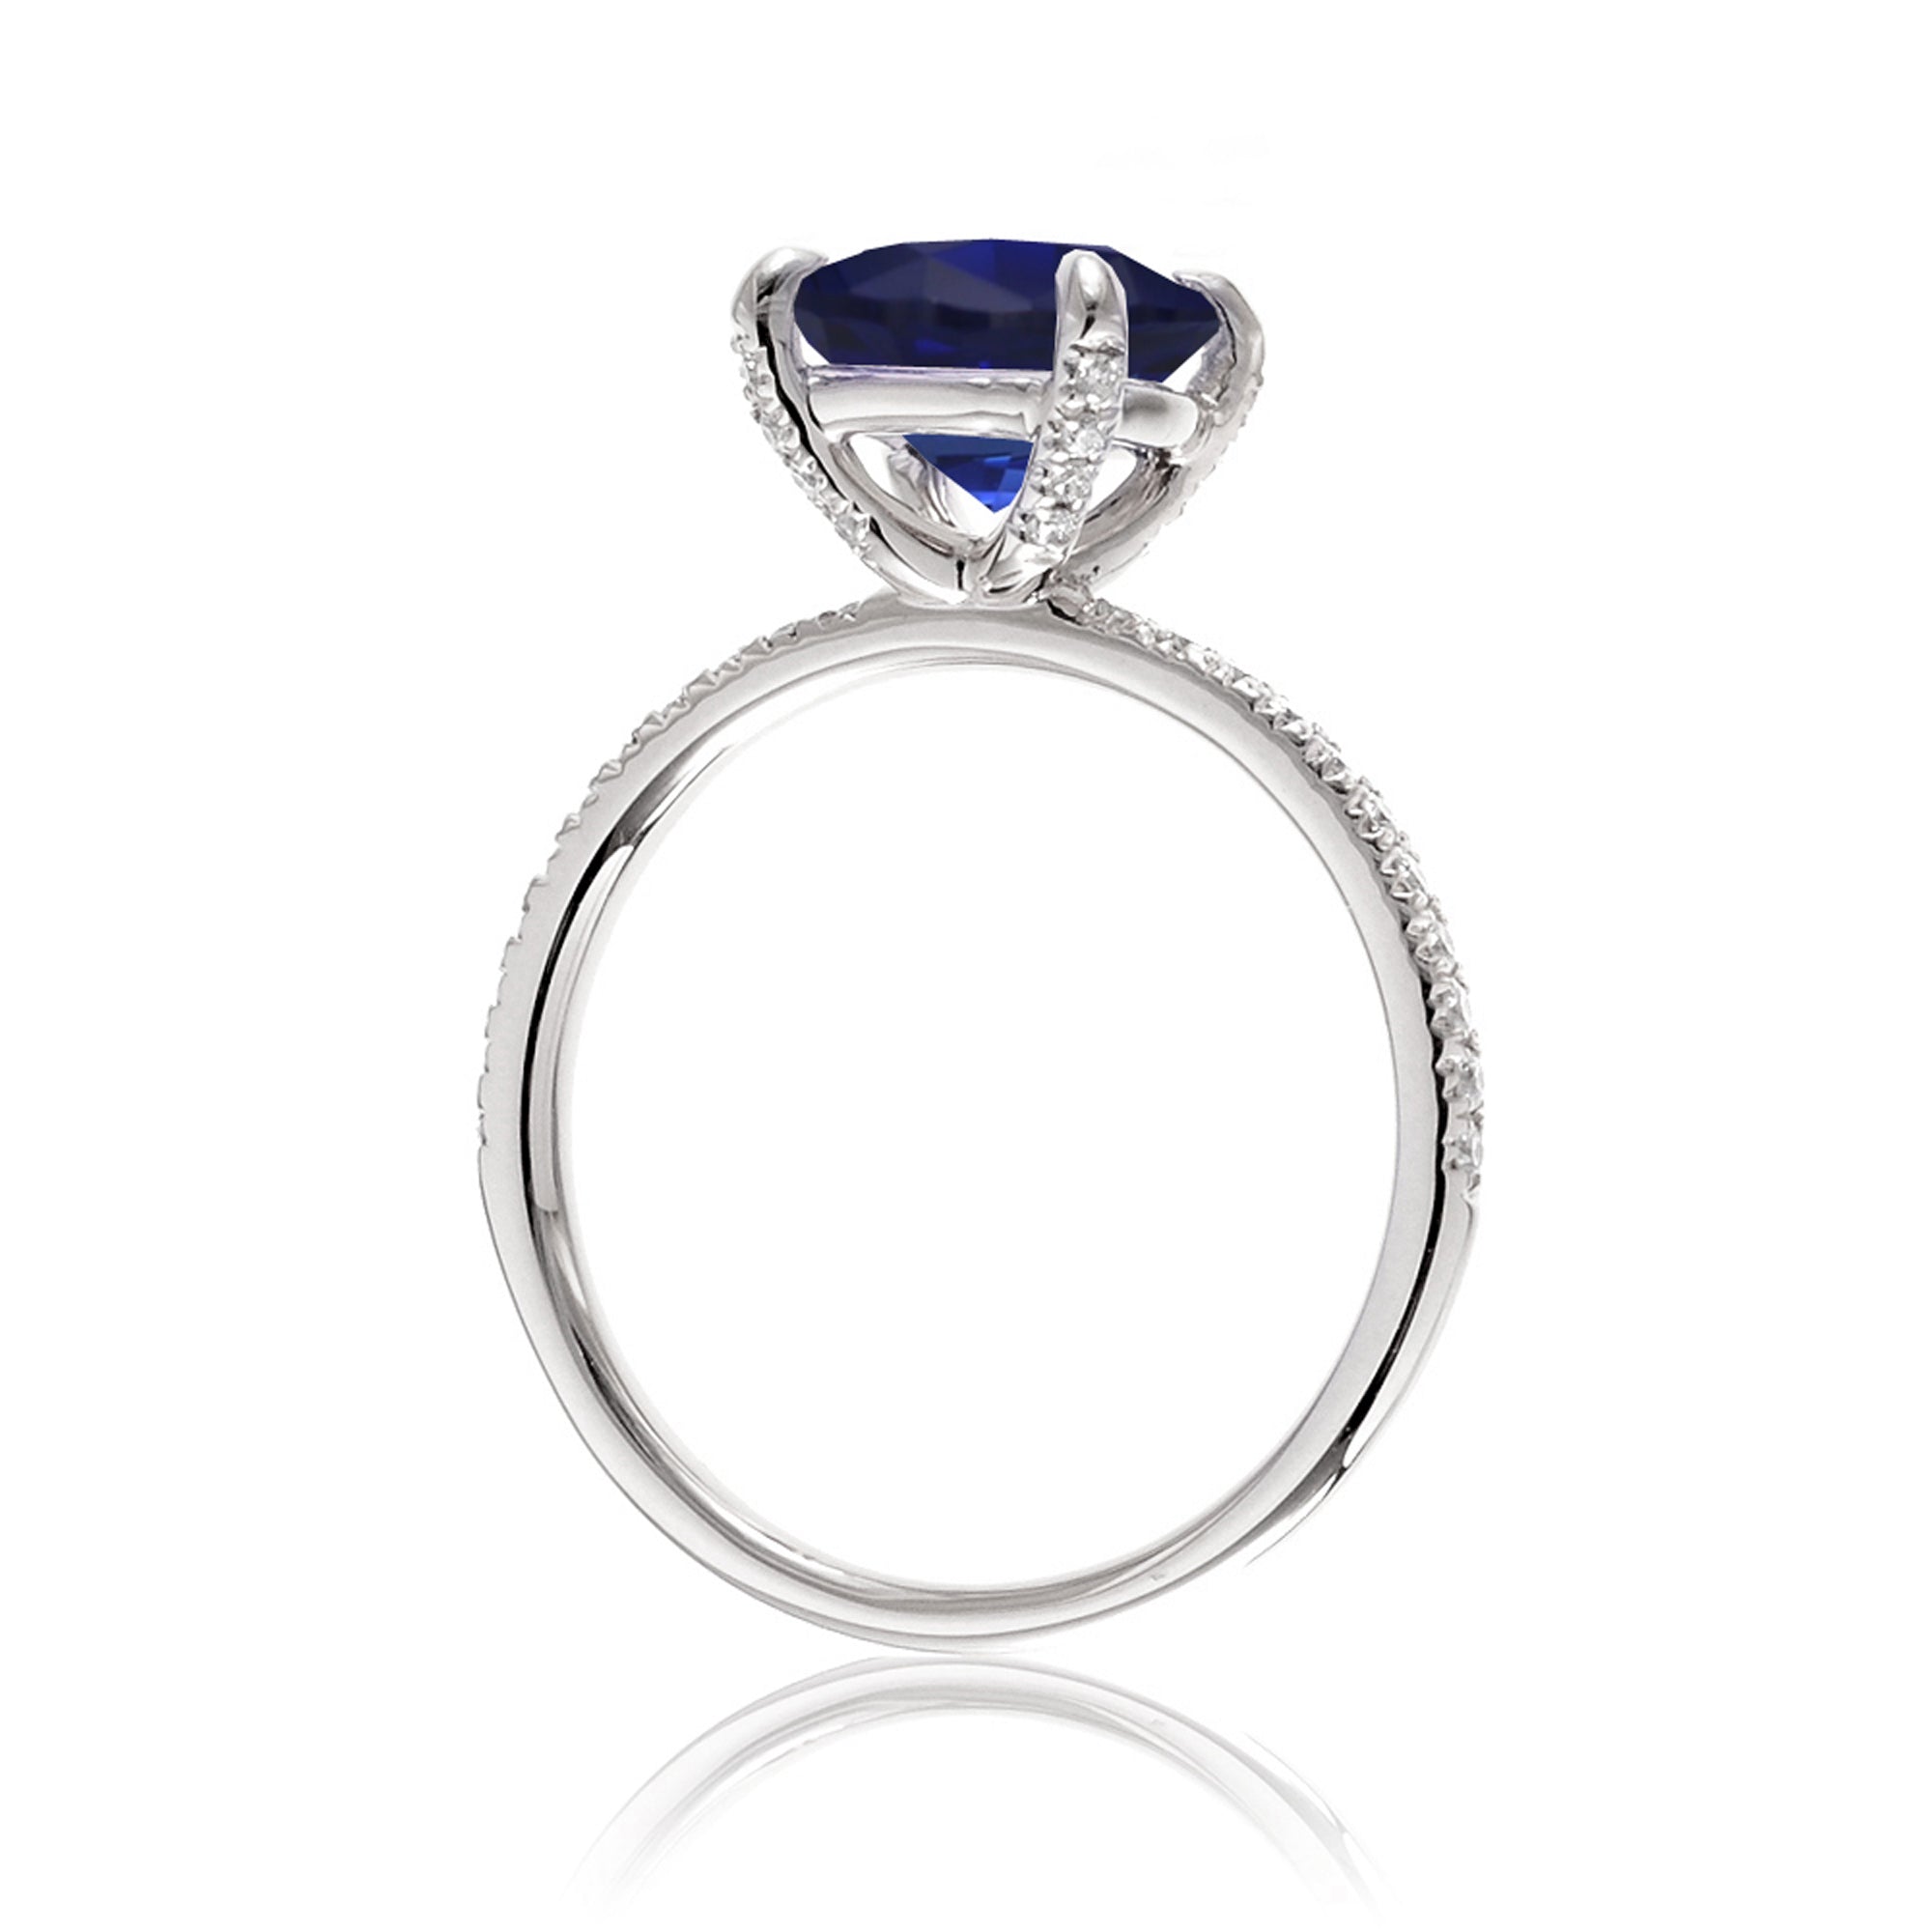 Oval blue sapphire diamond band engagement ring white gold - the Ava